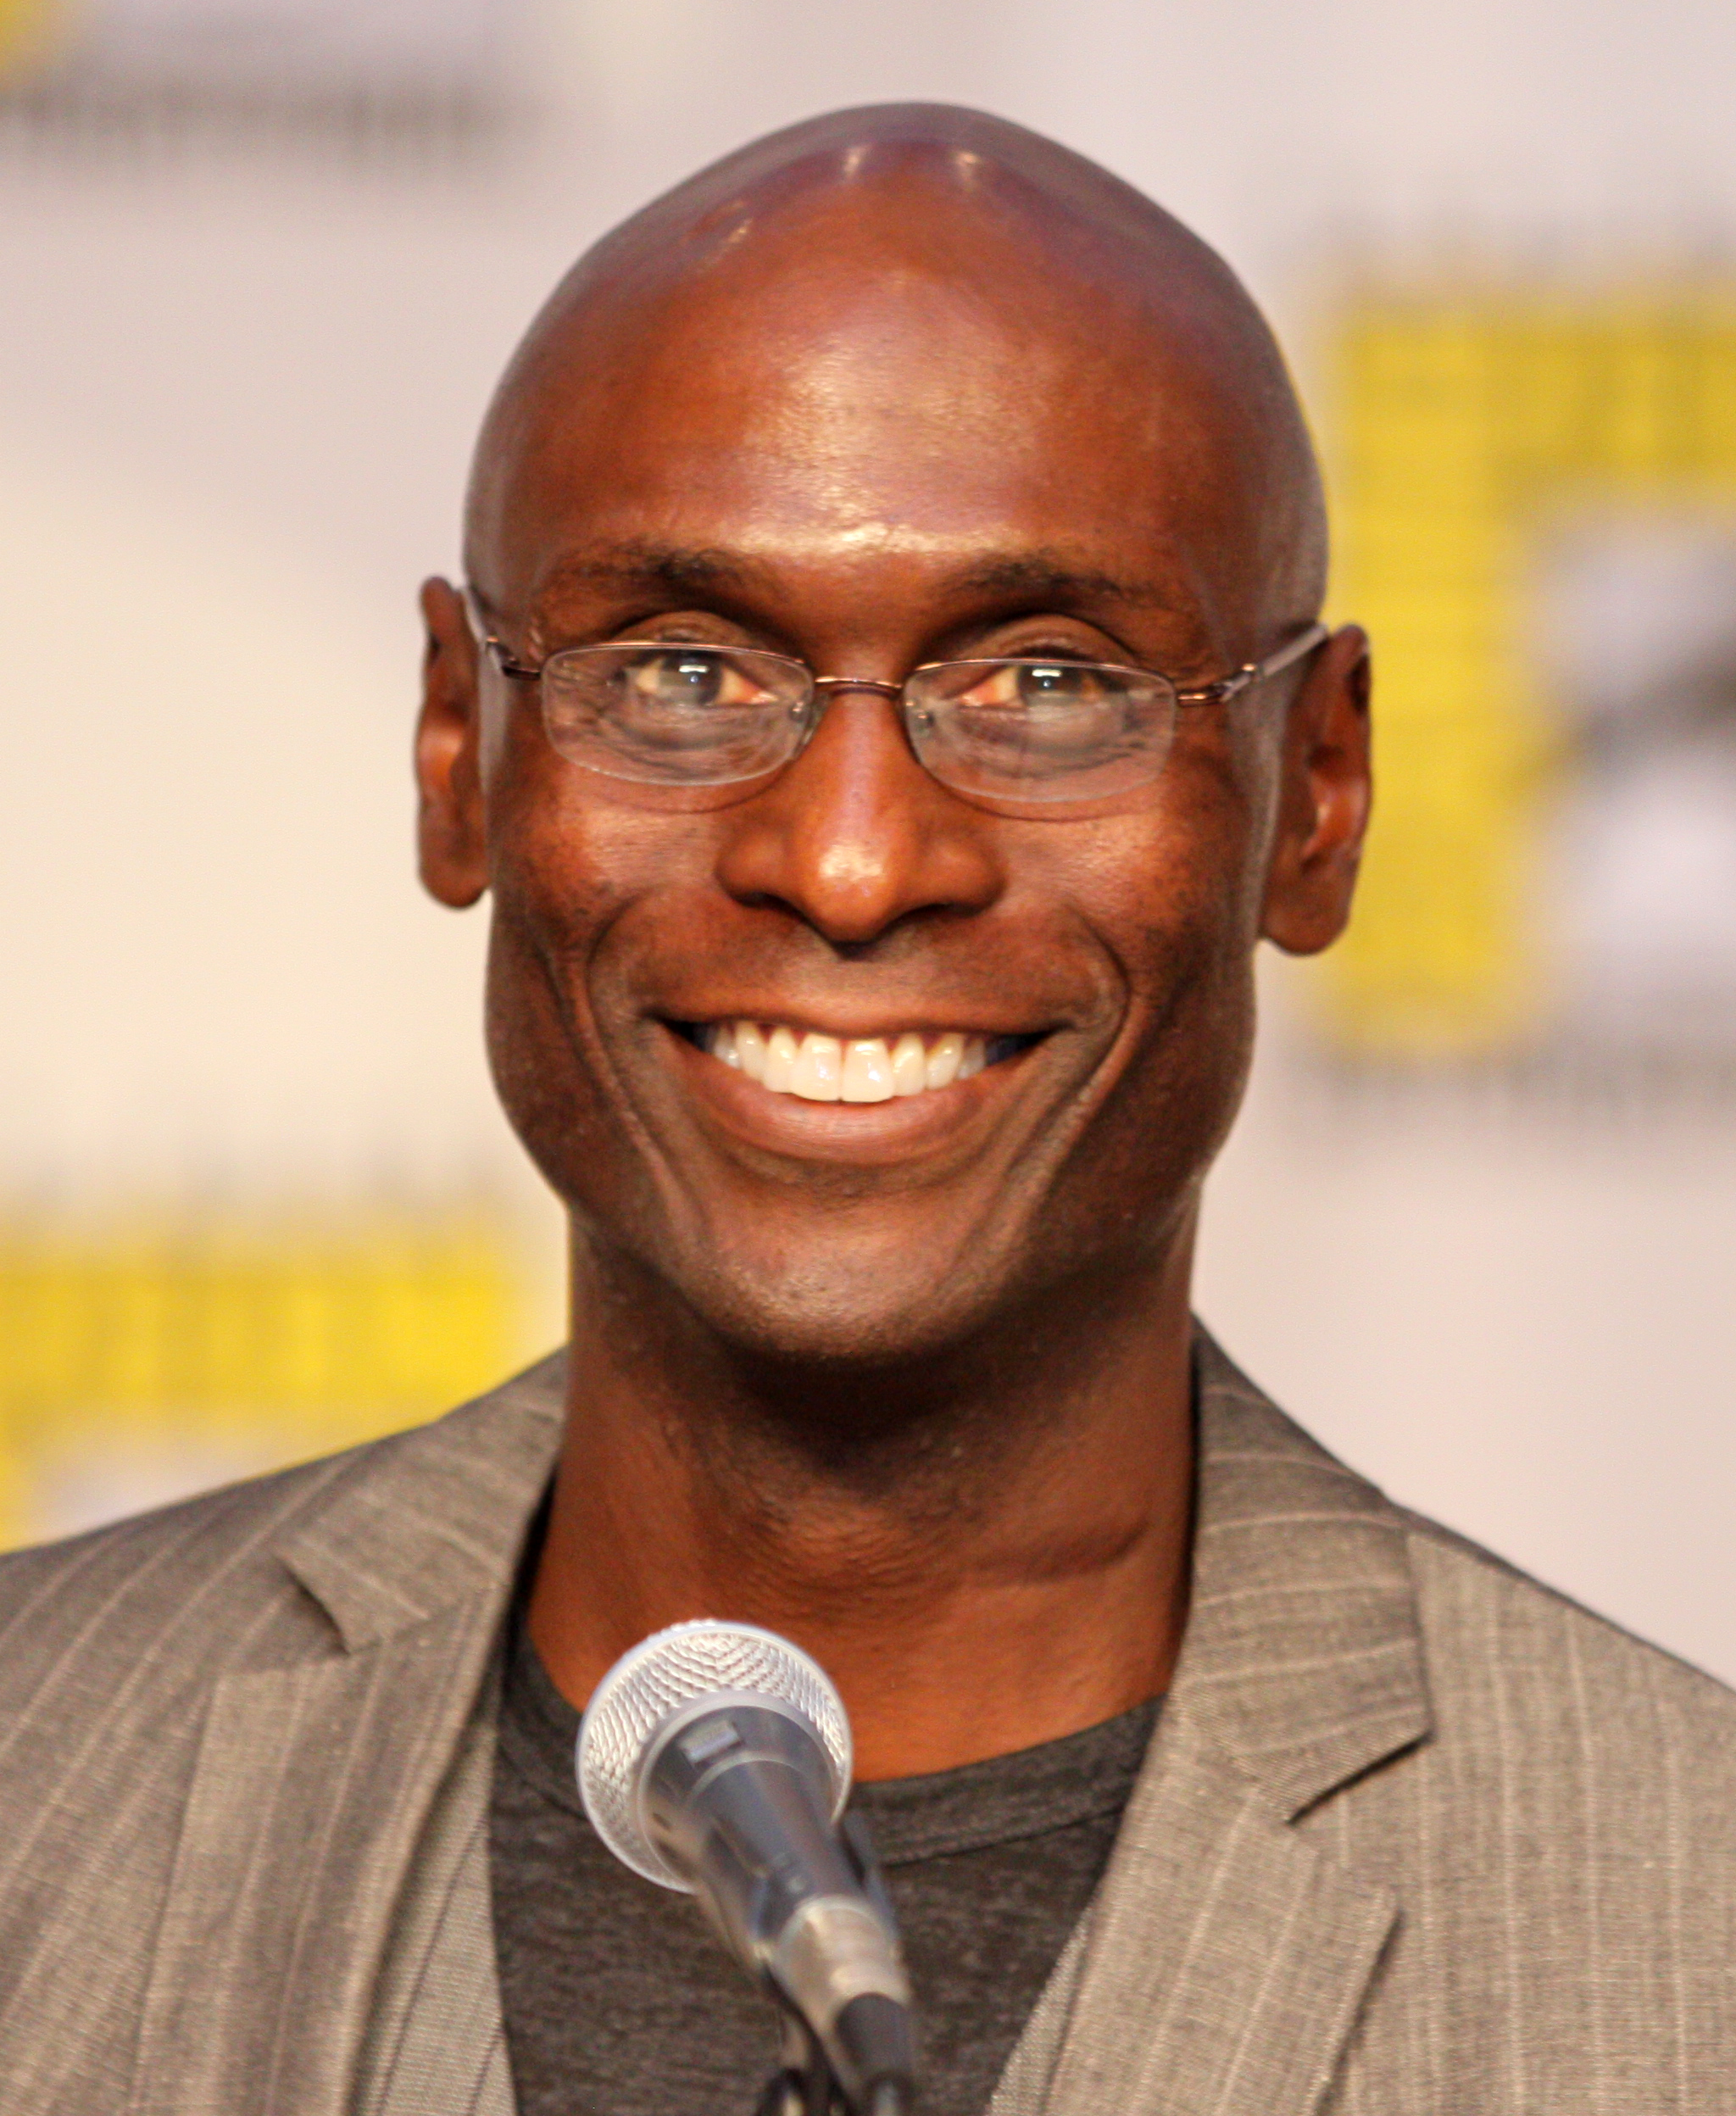 Lance Reddick Back at Work on Horizon Forbidden West, Could This Mean DLC?